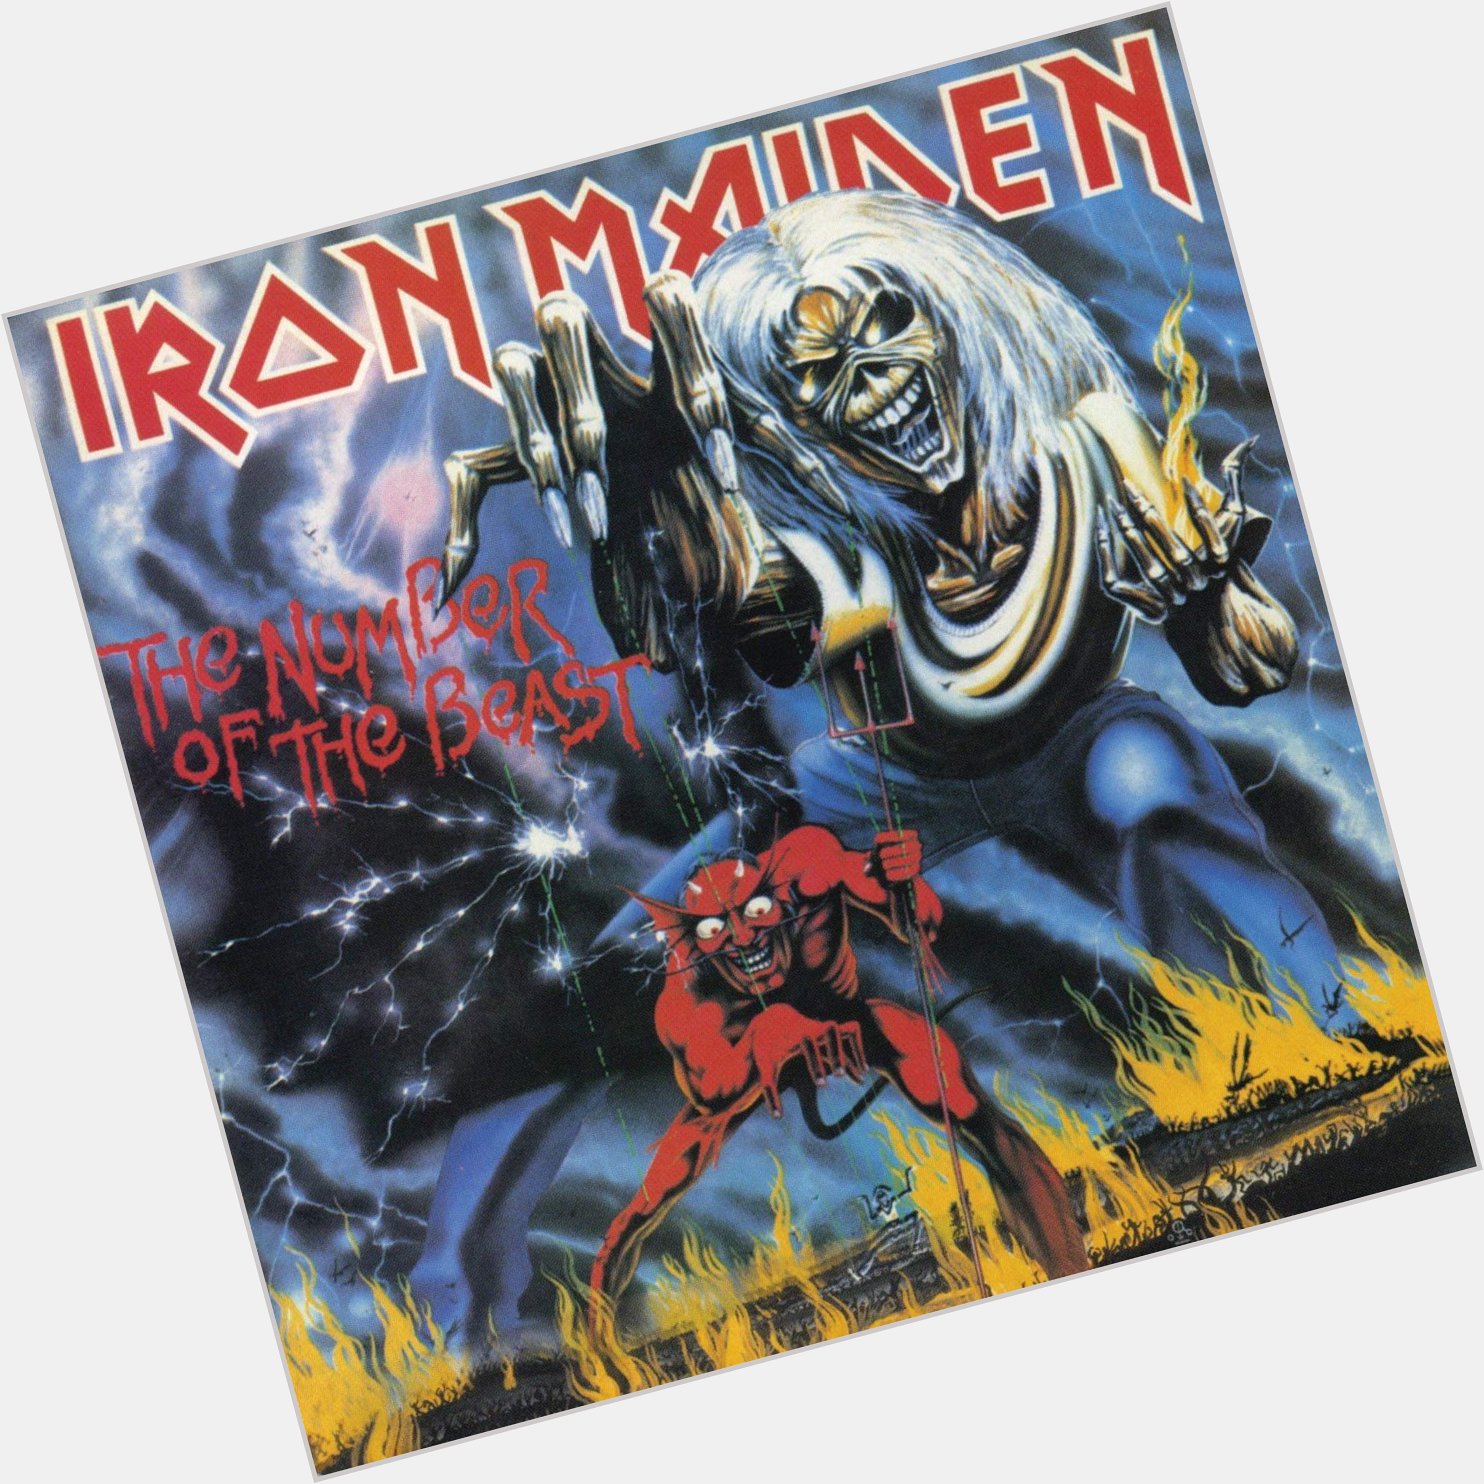  Hallowed Be Thy Name
from The Number Of The Beast
by Iron Maiden

Happy Birthday, Adrian Smith! 